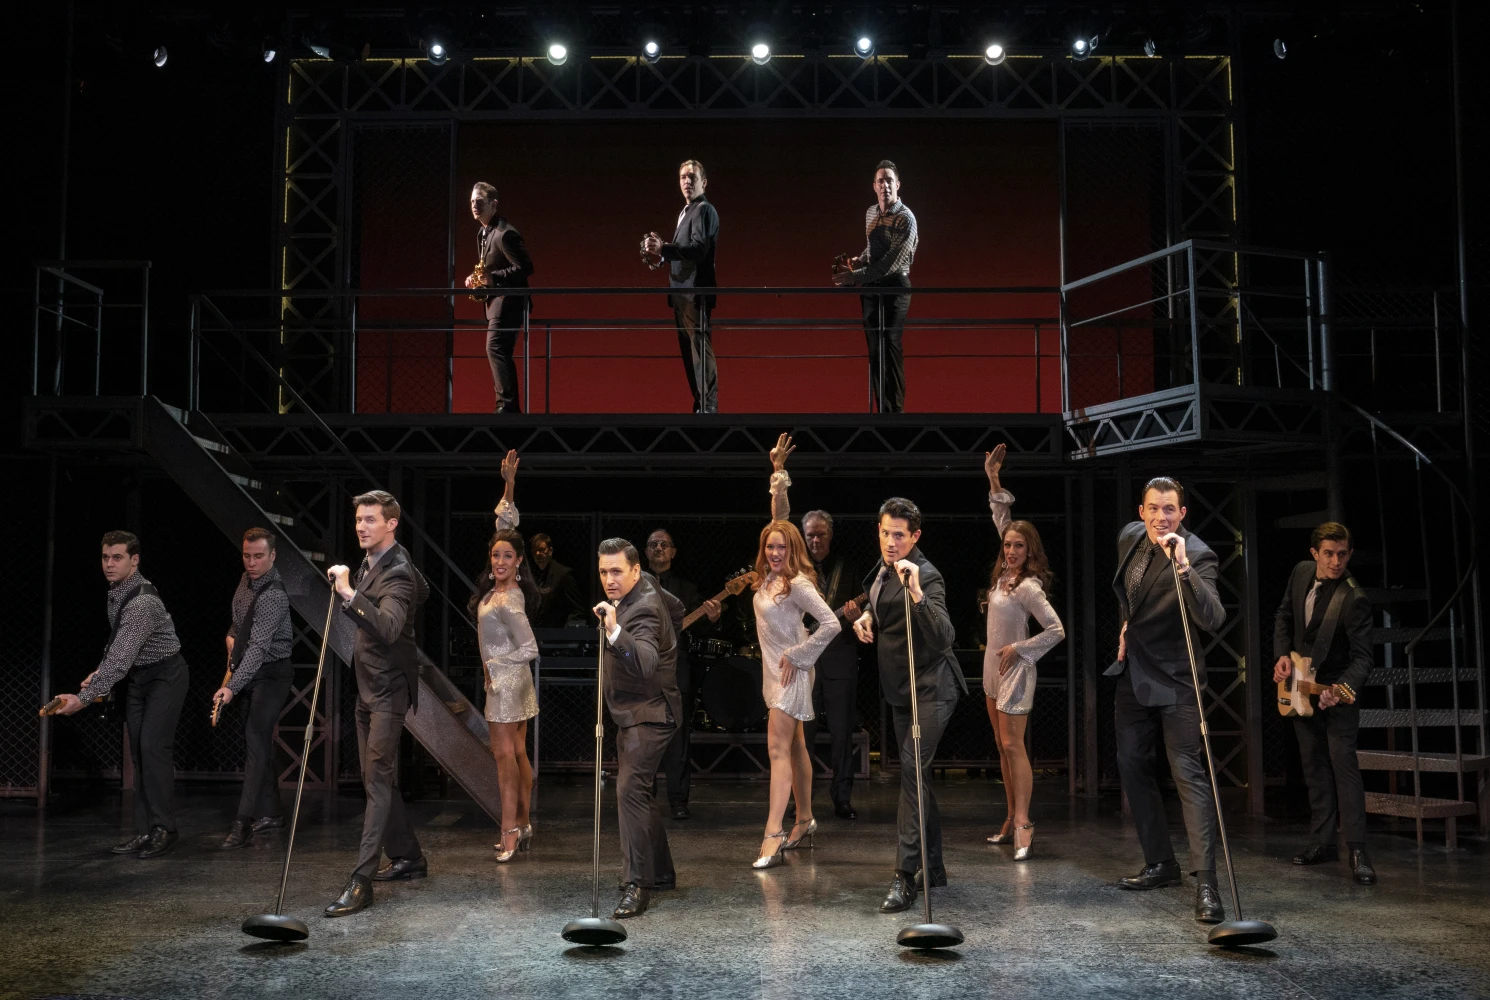 Jersey Boys: What to expect - 2